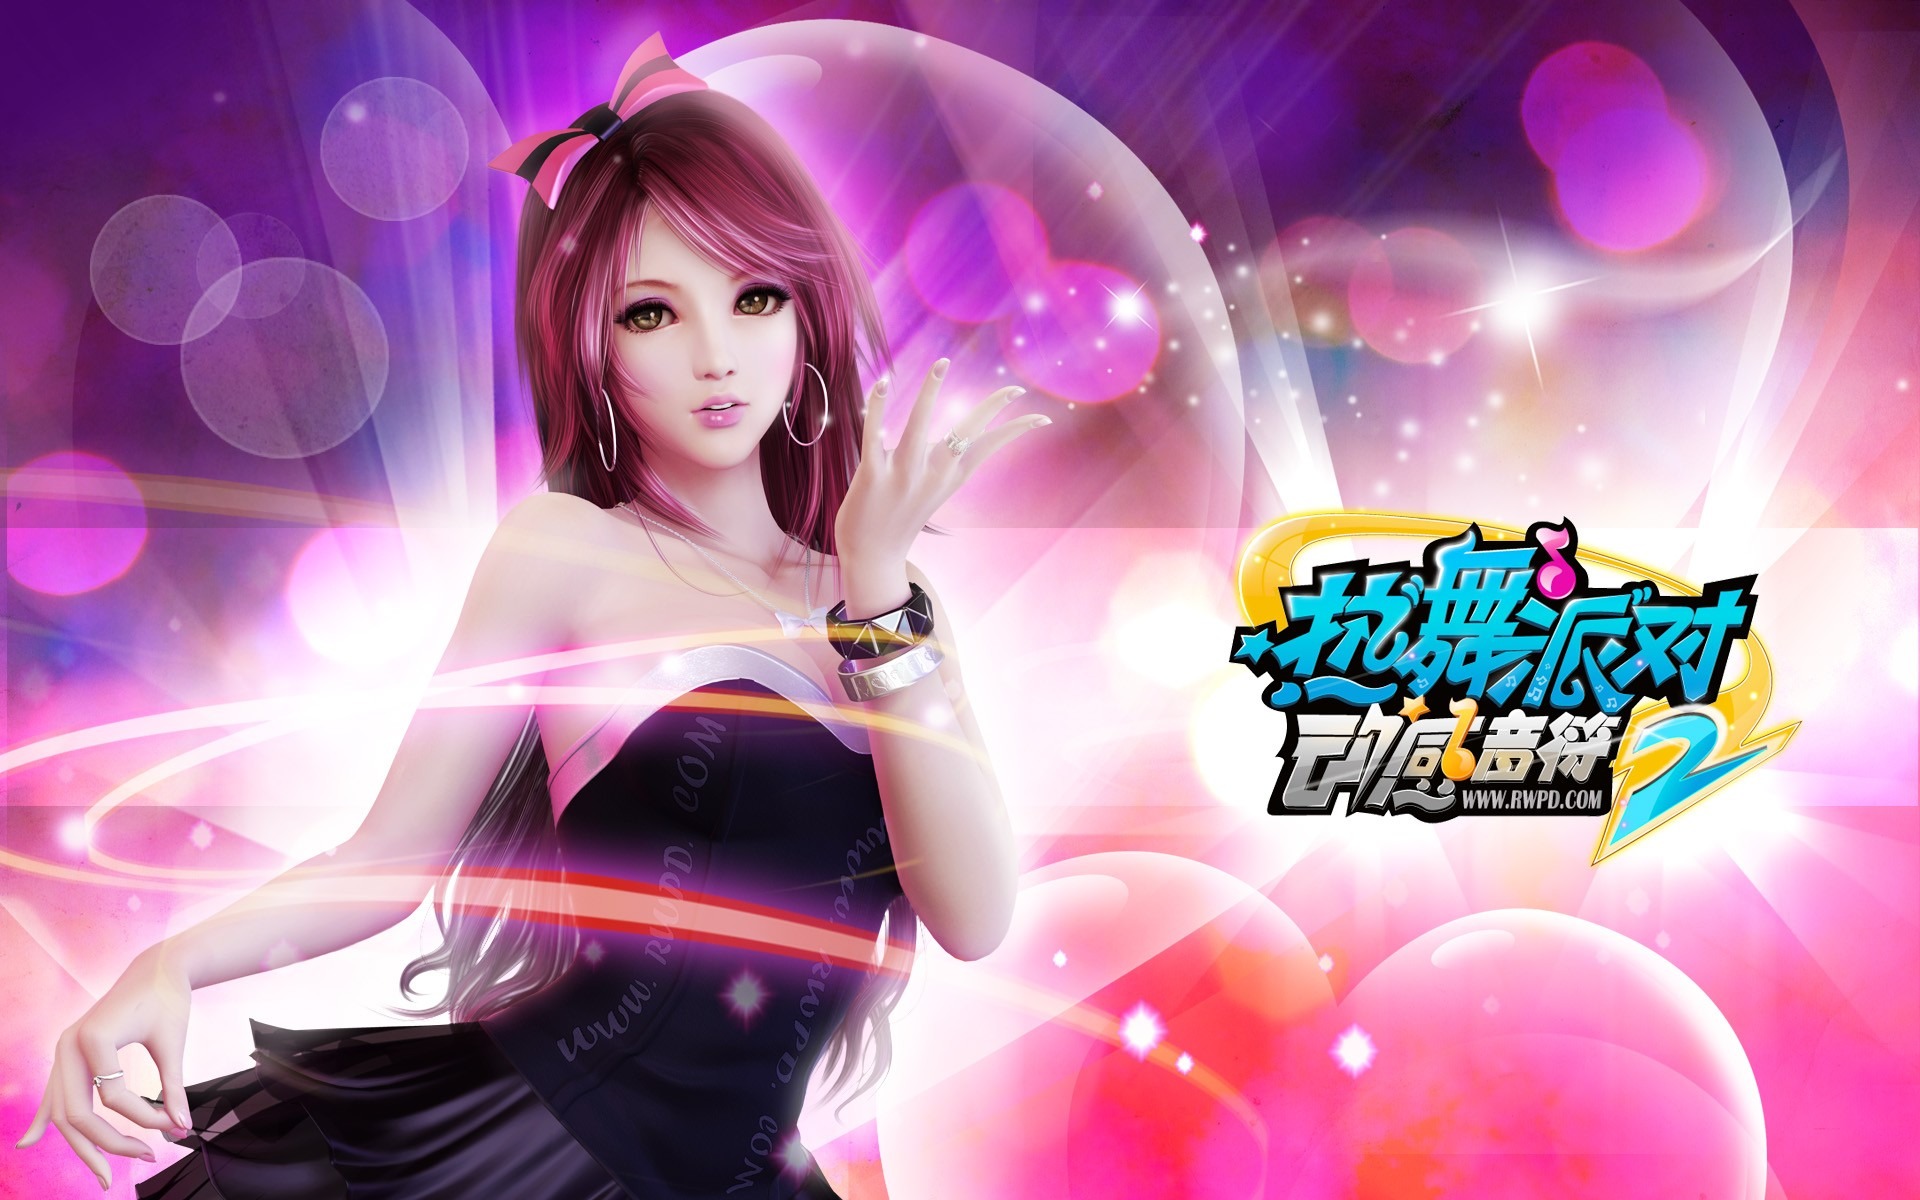 Online game Hot Dance Party II official wallpapers #1 - 1920x1200